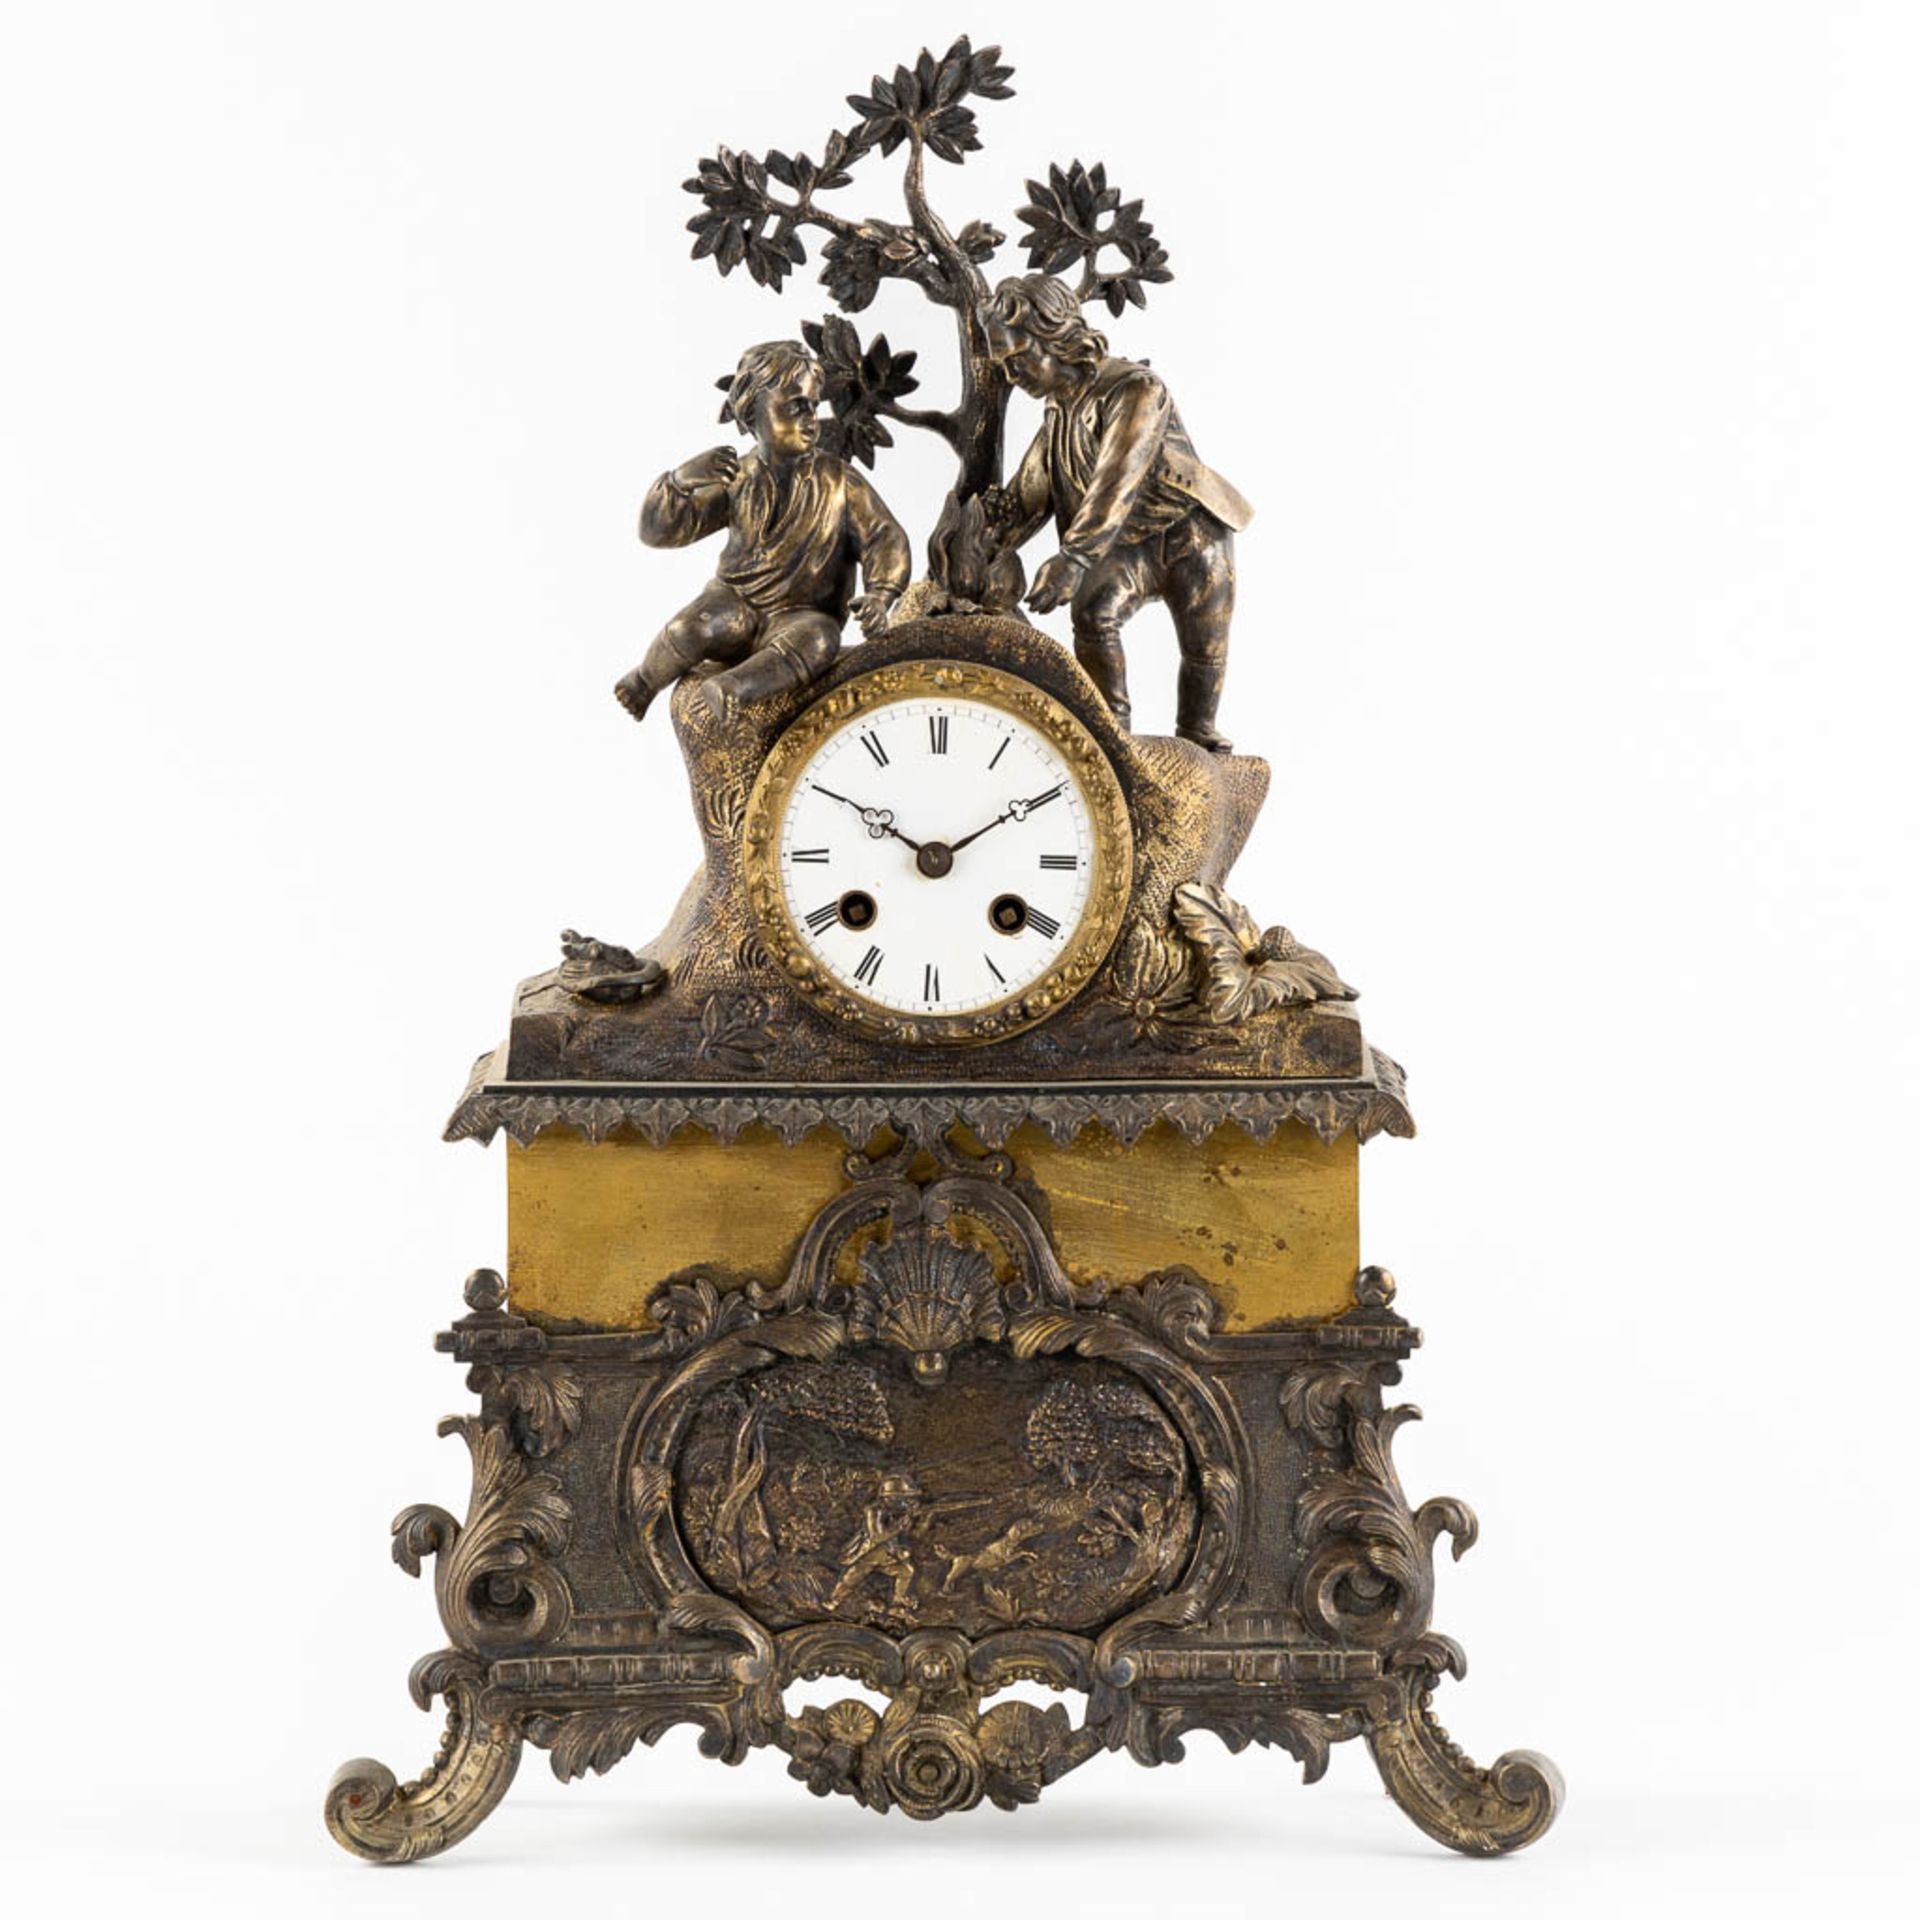 A mantle clock, patinated and gilt bronze with a hunting and camping scène. 19th C. (L:10 x W:30 x H